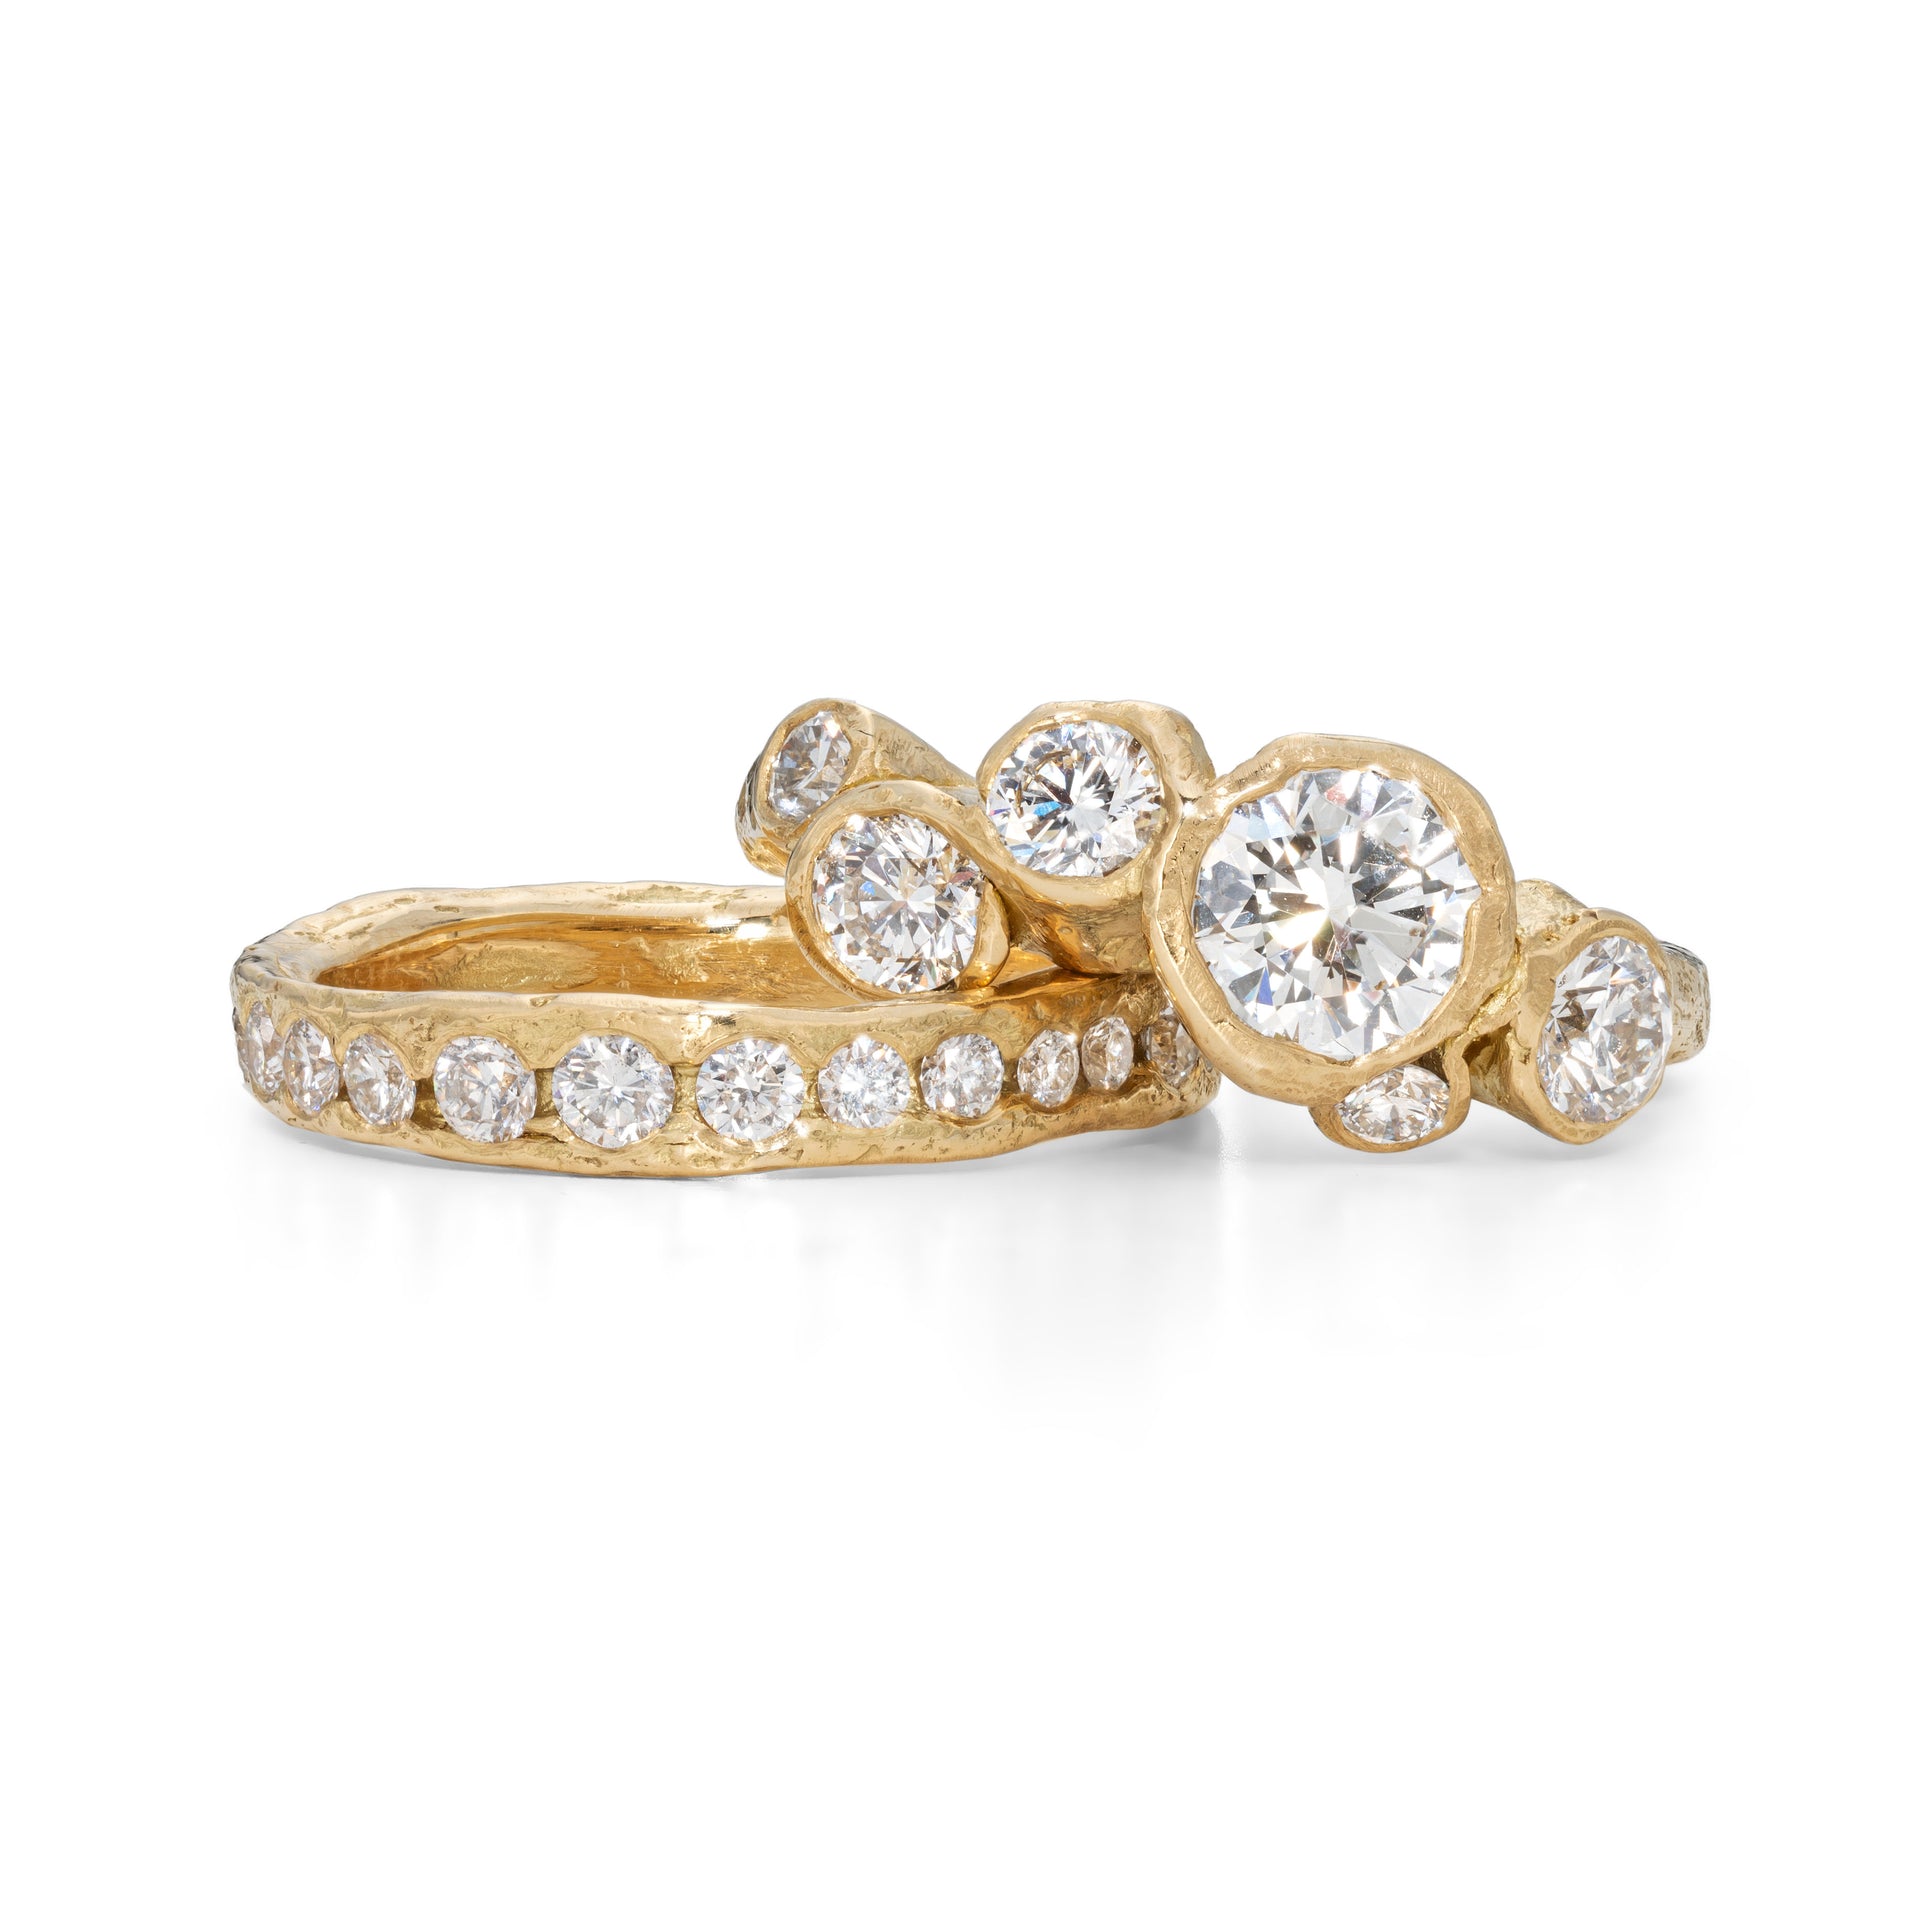 An 18ct gold and diamond engagement ring, with a large central diamond in the middle. Photographed next to a diamond channel ring, in a stack. Handmade by Emily Nixon.